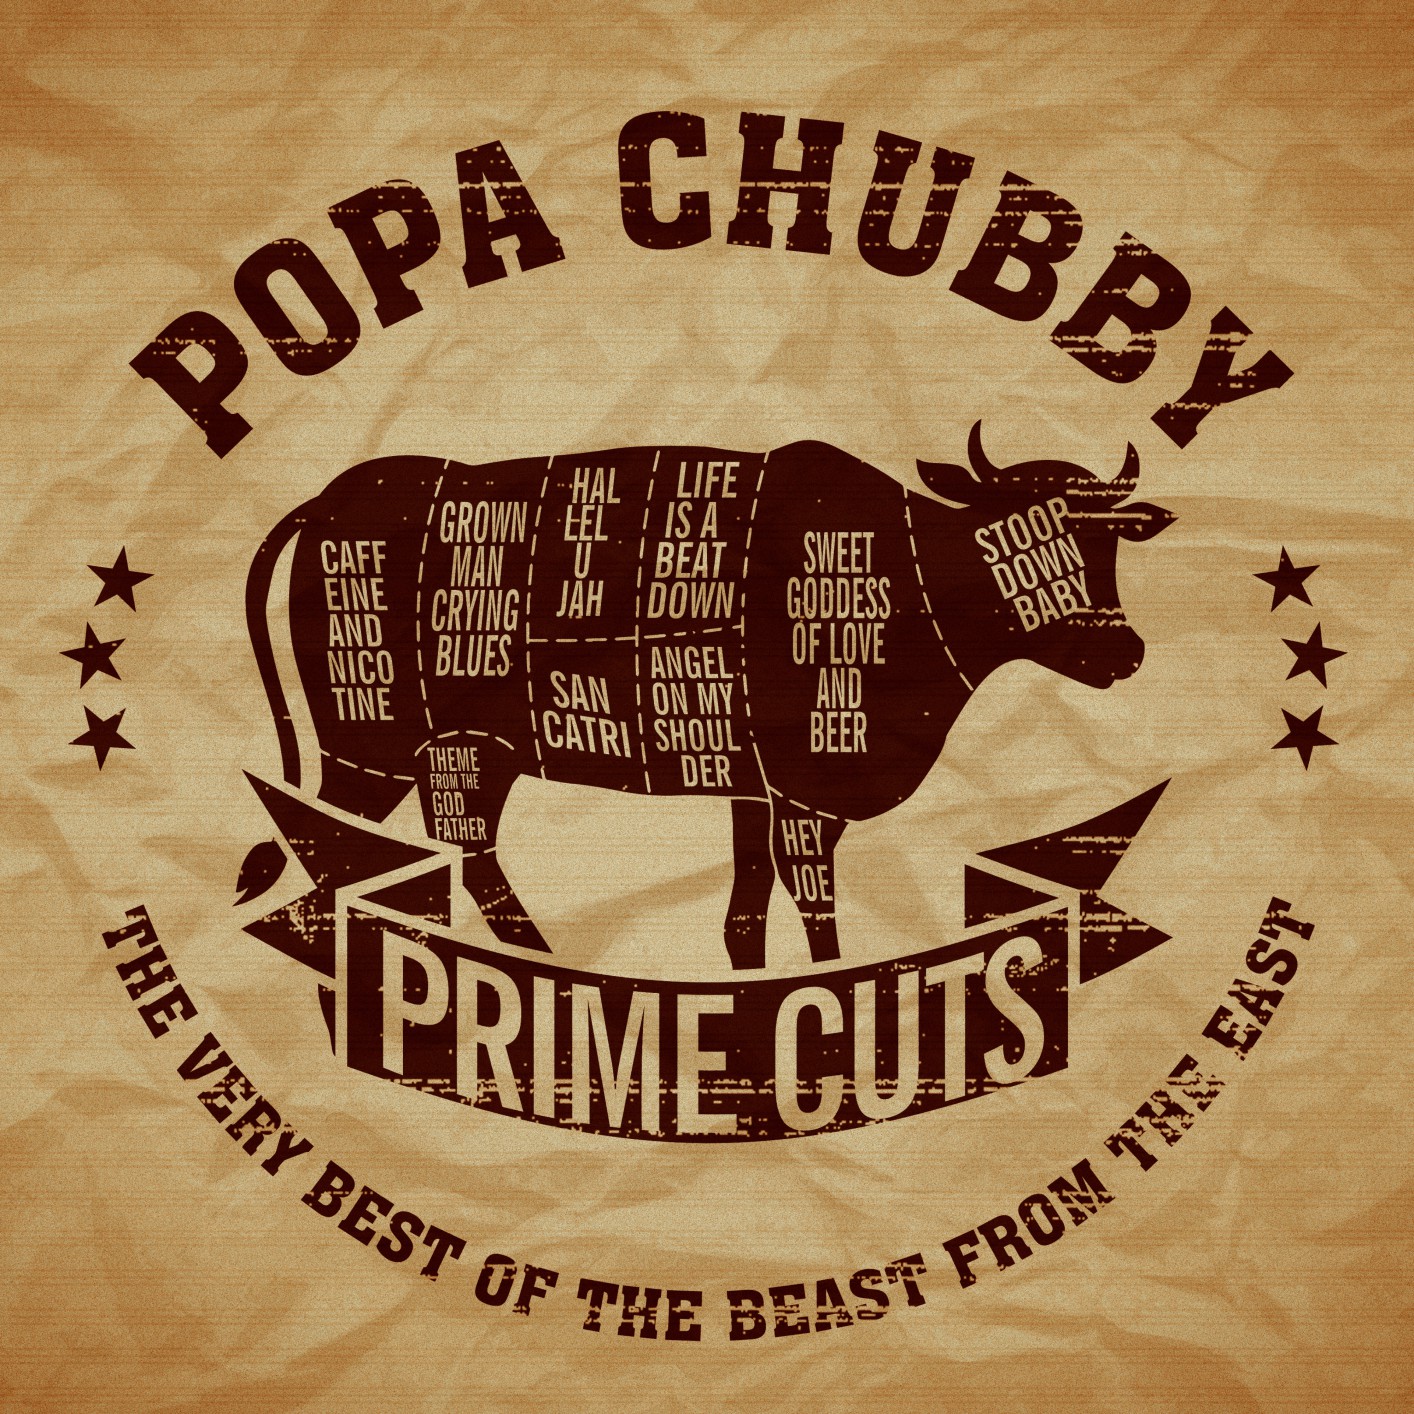 Popa Chubby – Prime Cuts: The Very Best of the Beast from the East (2018) [FLAC 24bit/48kHz]